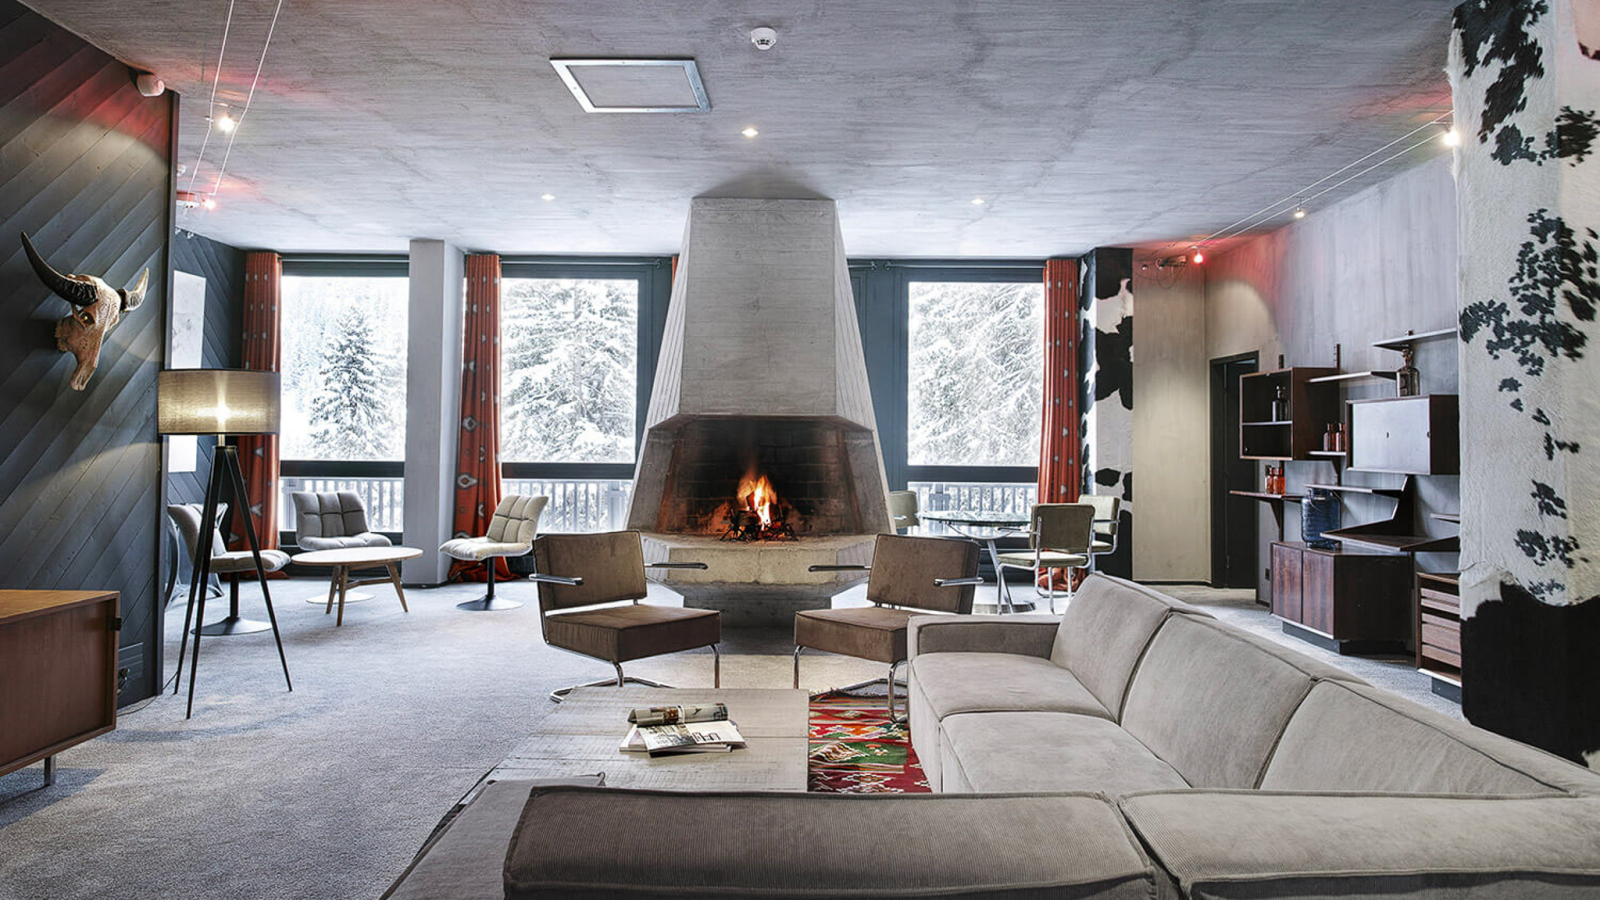 The Bauhaus-style fireplace at Totem Friendly Hôtel & Spa, located in one of the hotel's suites